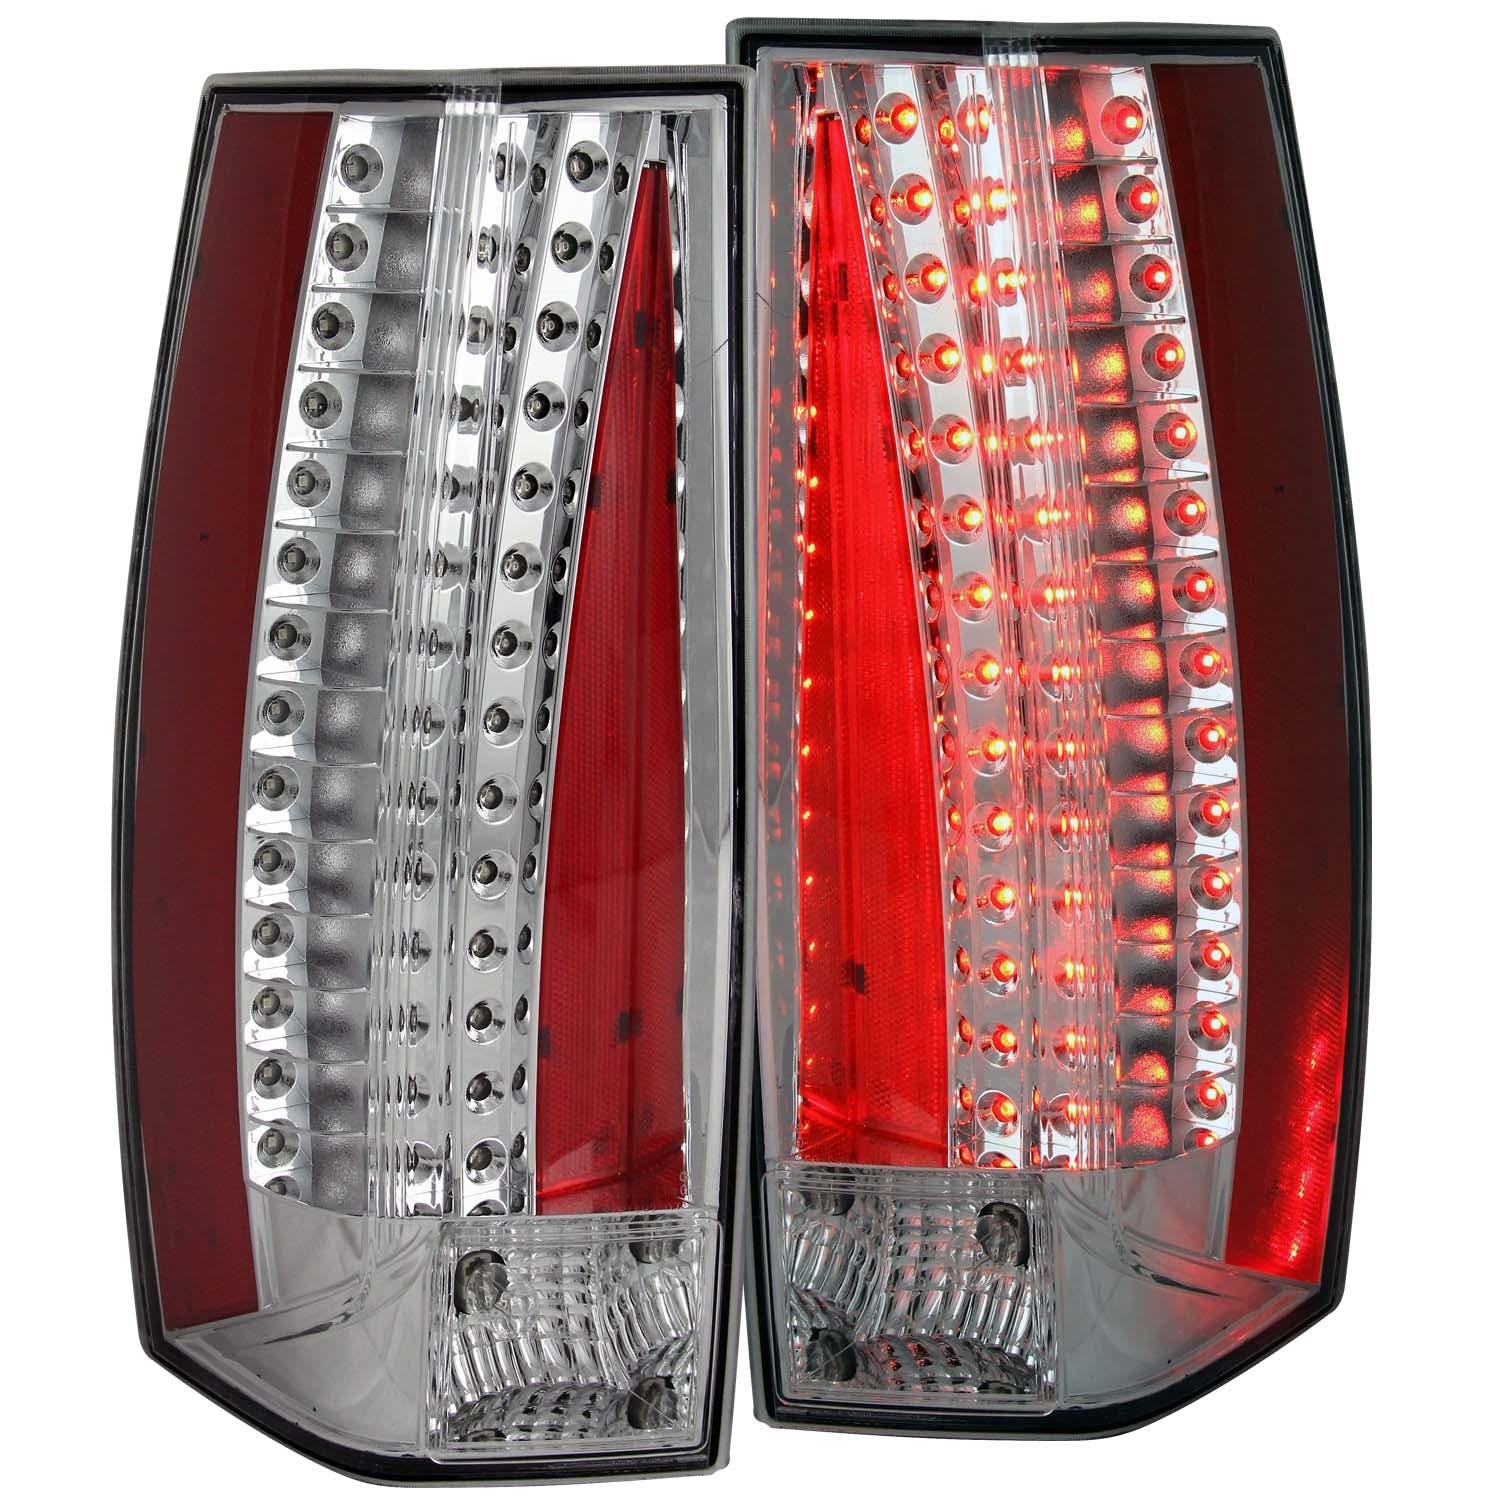 AnzoUSA 321287 LED Taillights Chrome